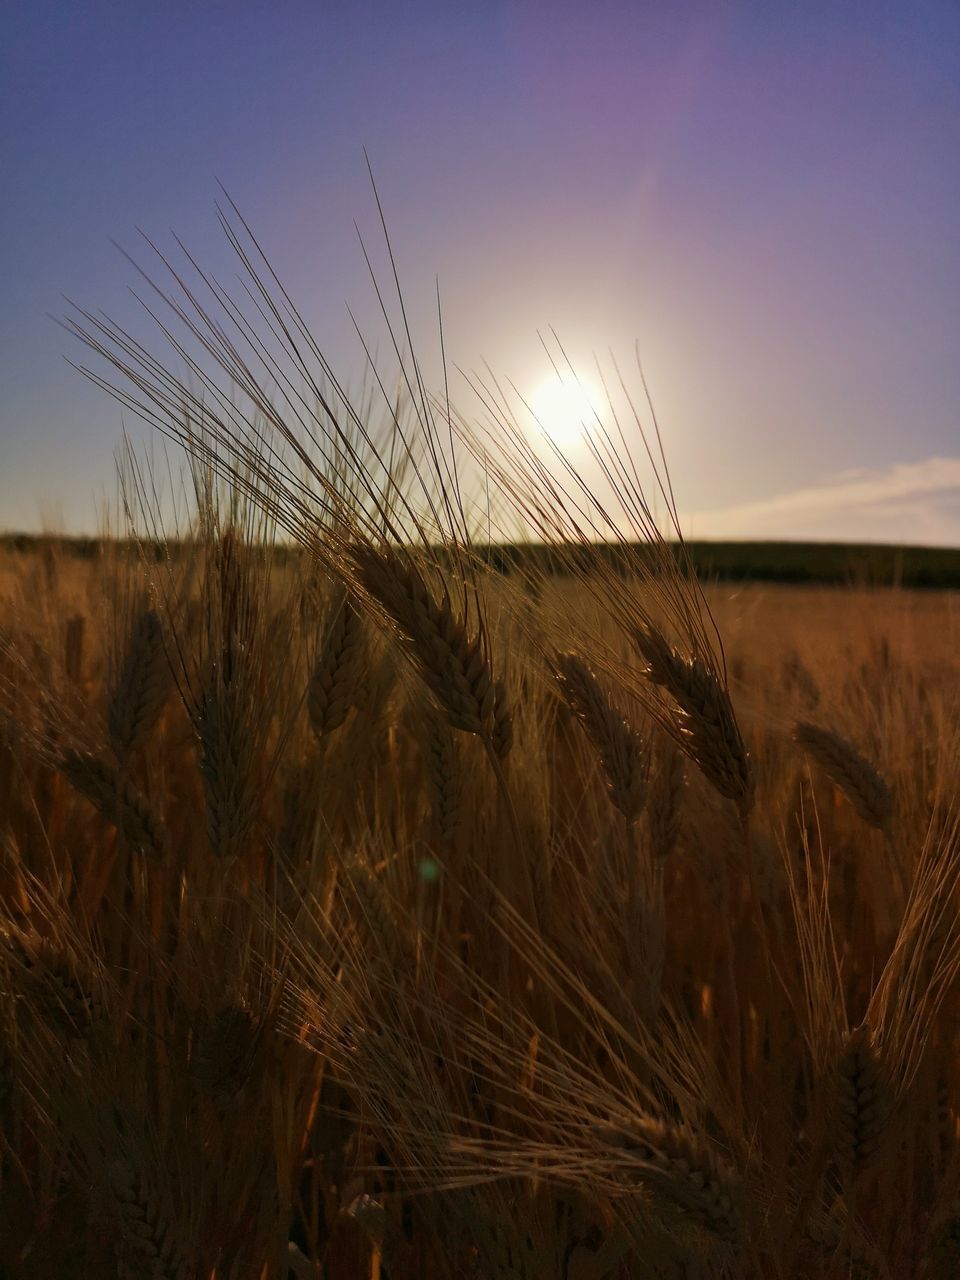 SCENIC SHOT OF WHEAT FIELD AGAINST SKY